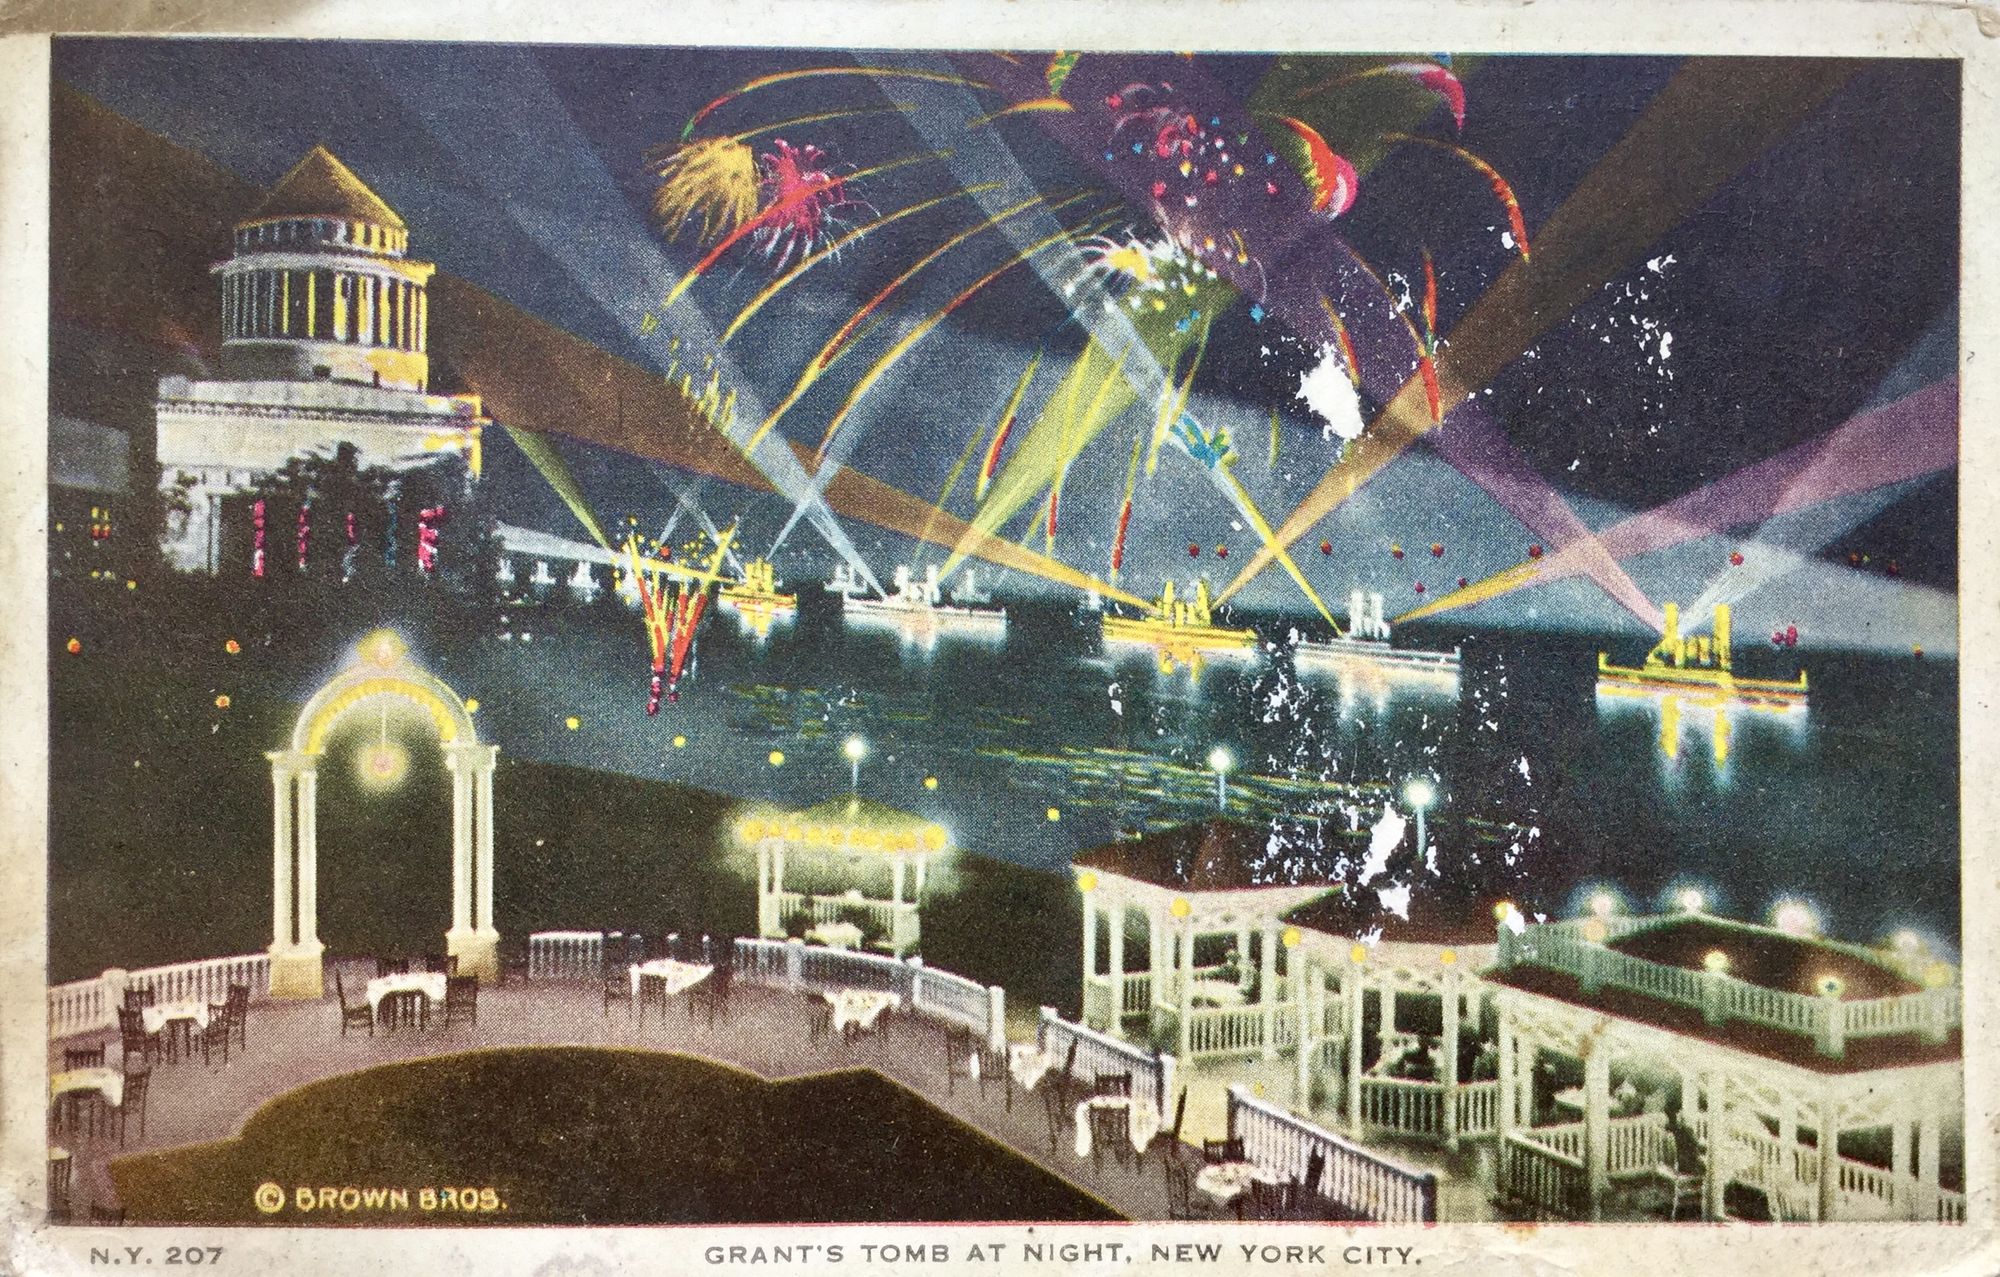 Archival postcard featuring "Grant's Tomb at Night, New York City." Barges line the nearby river, shooting fireworks off their decks.